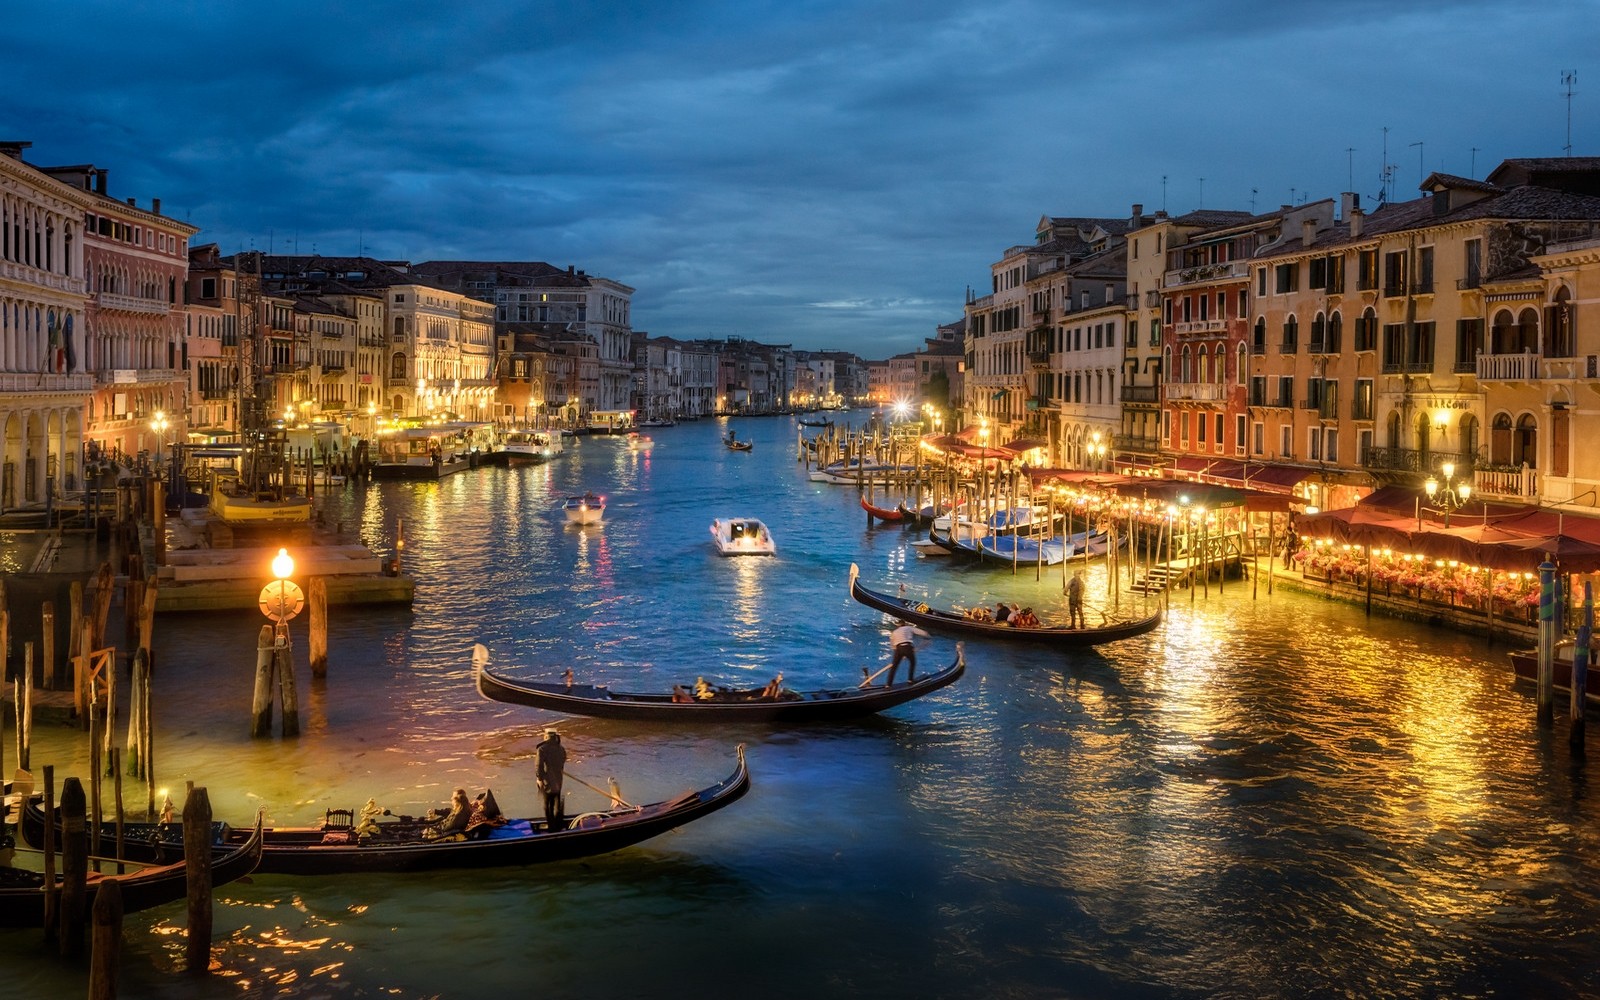 General 1600x1000 photography urban architecture canal sea gondolas lights old building evening Venice Italy Grand Canal city lights